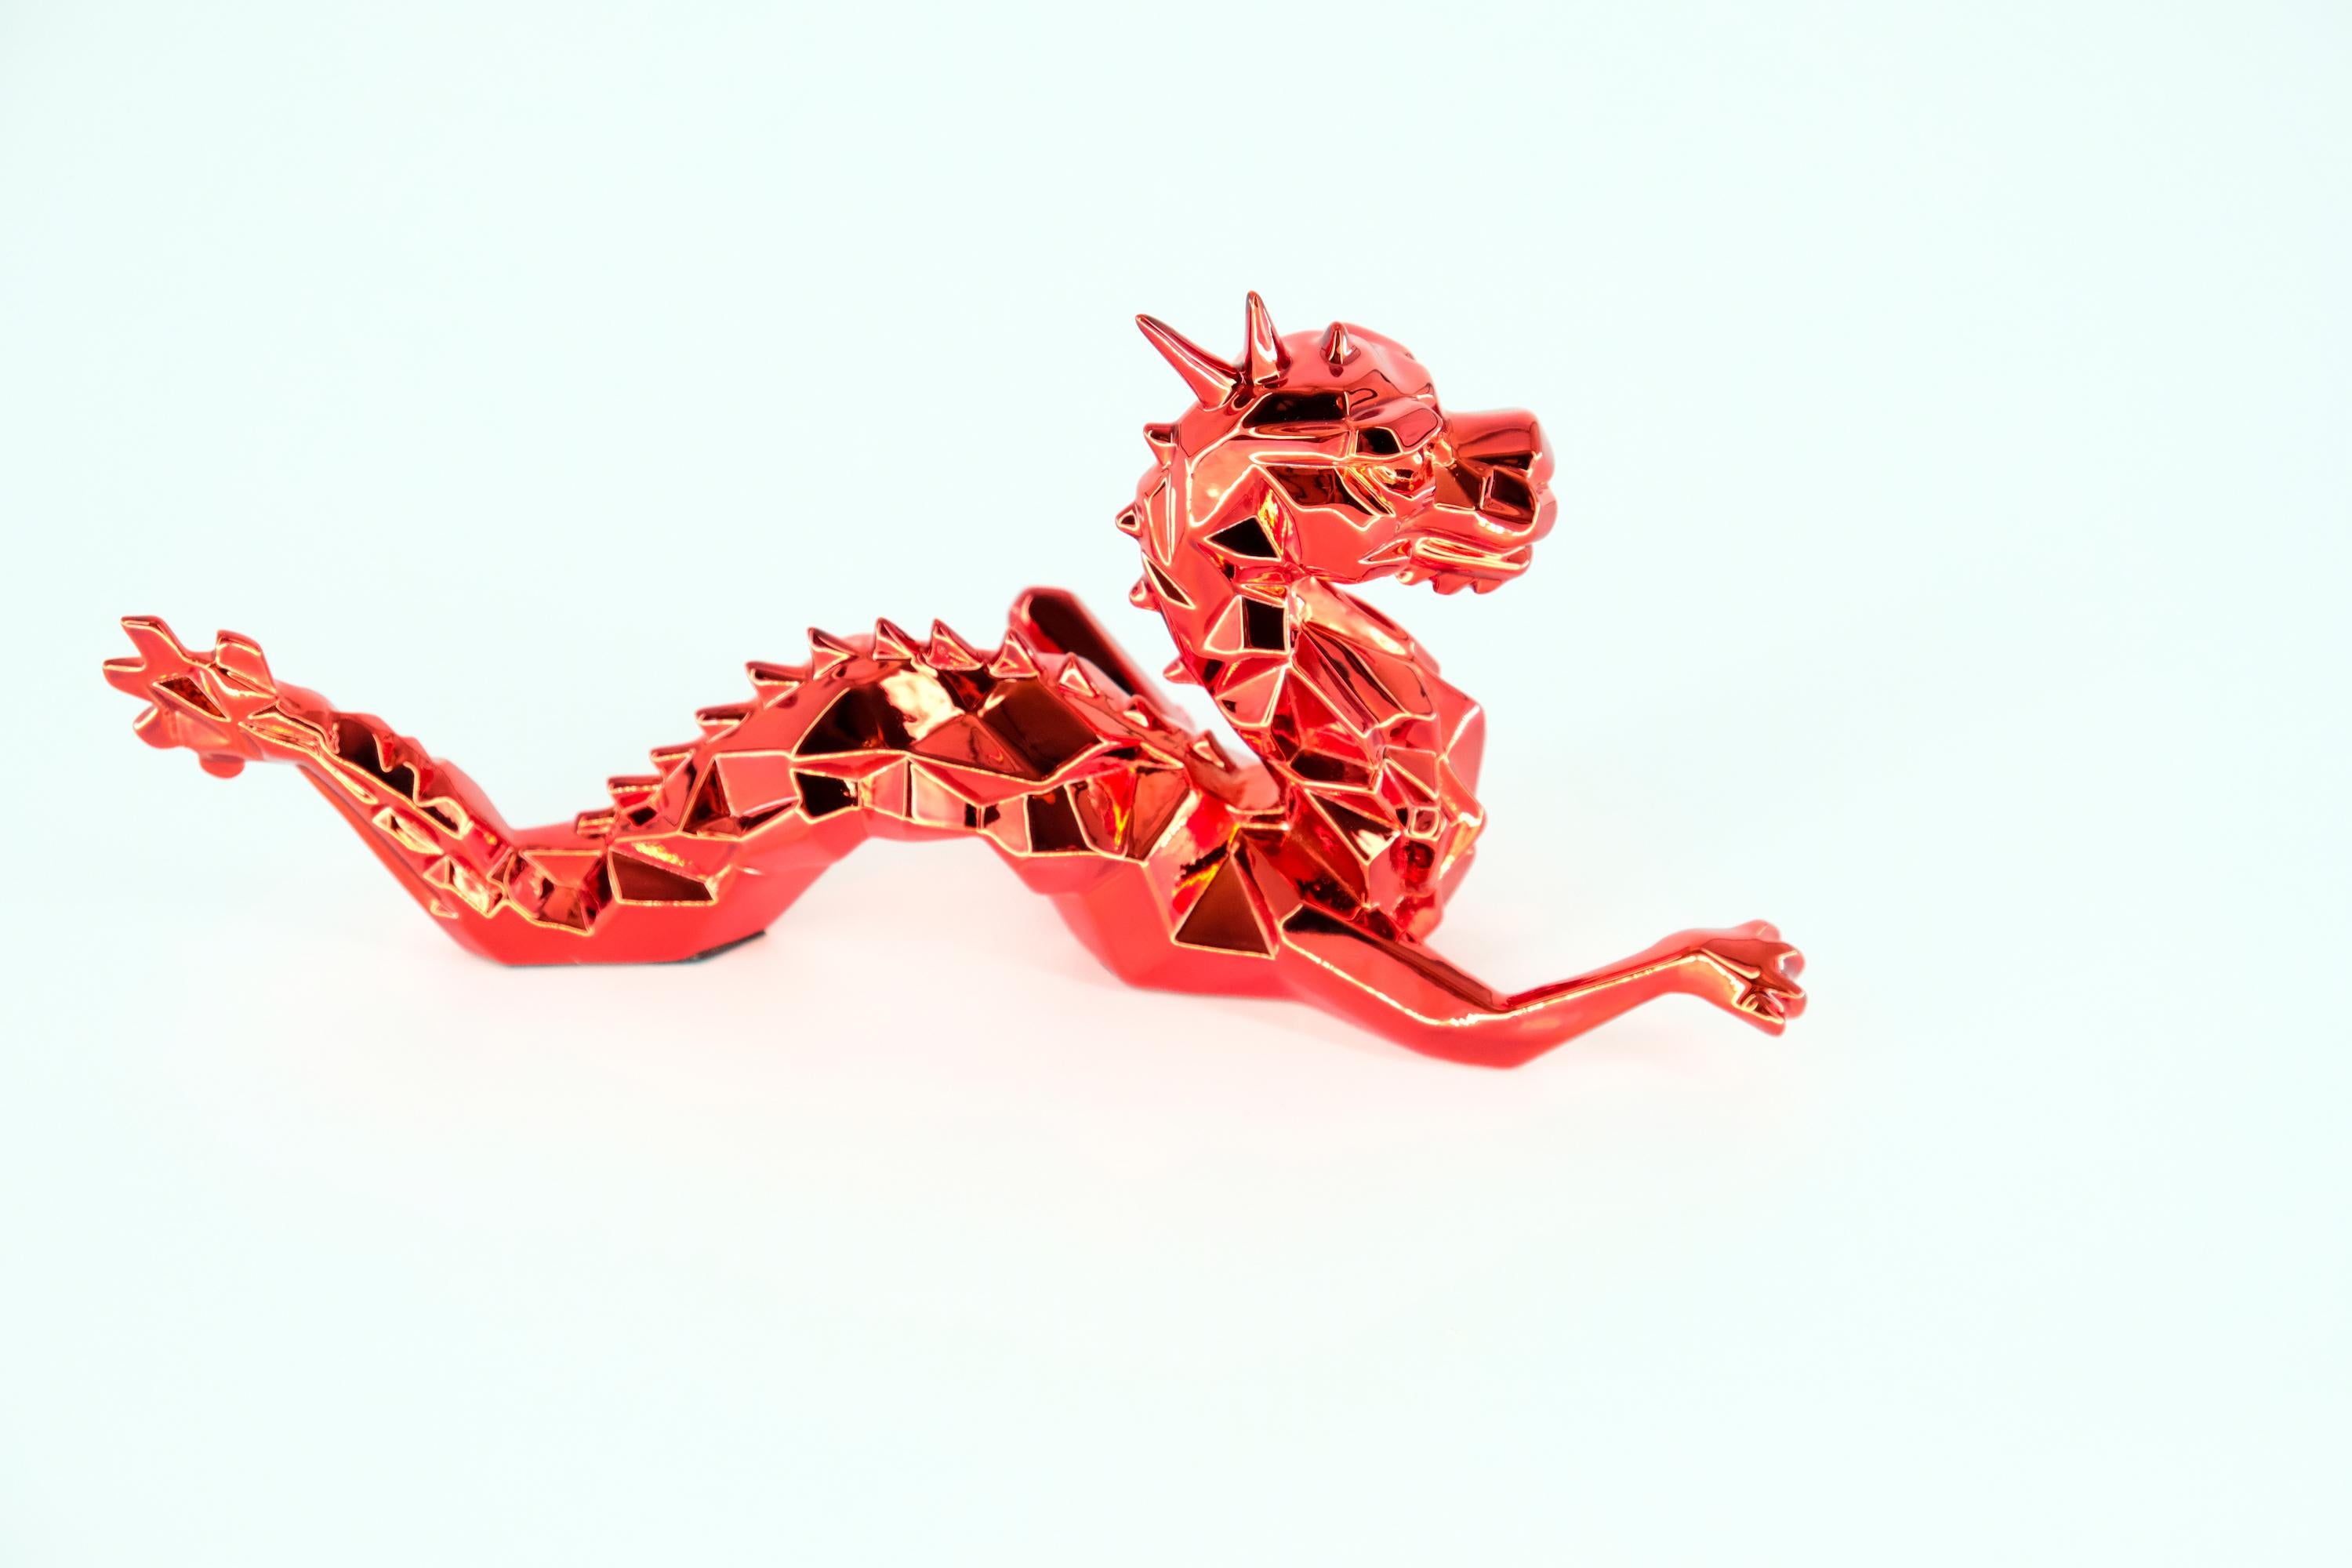 Dragon Spirit  (Red Edition) - Sculpture in original box with artist certificate For Sale 2